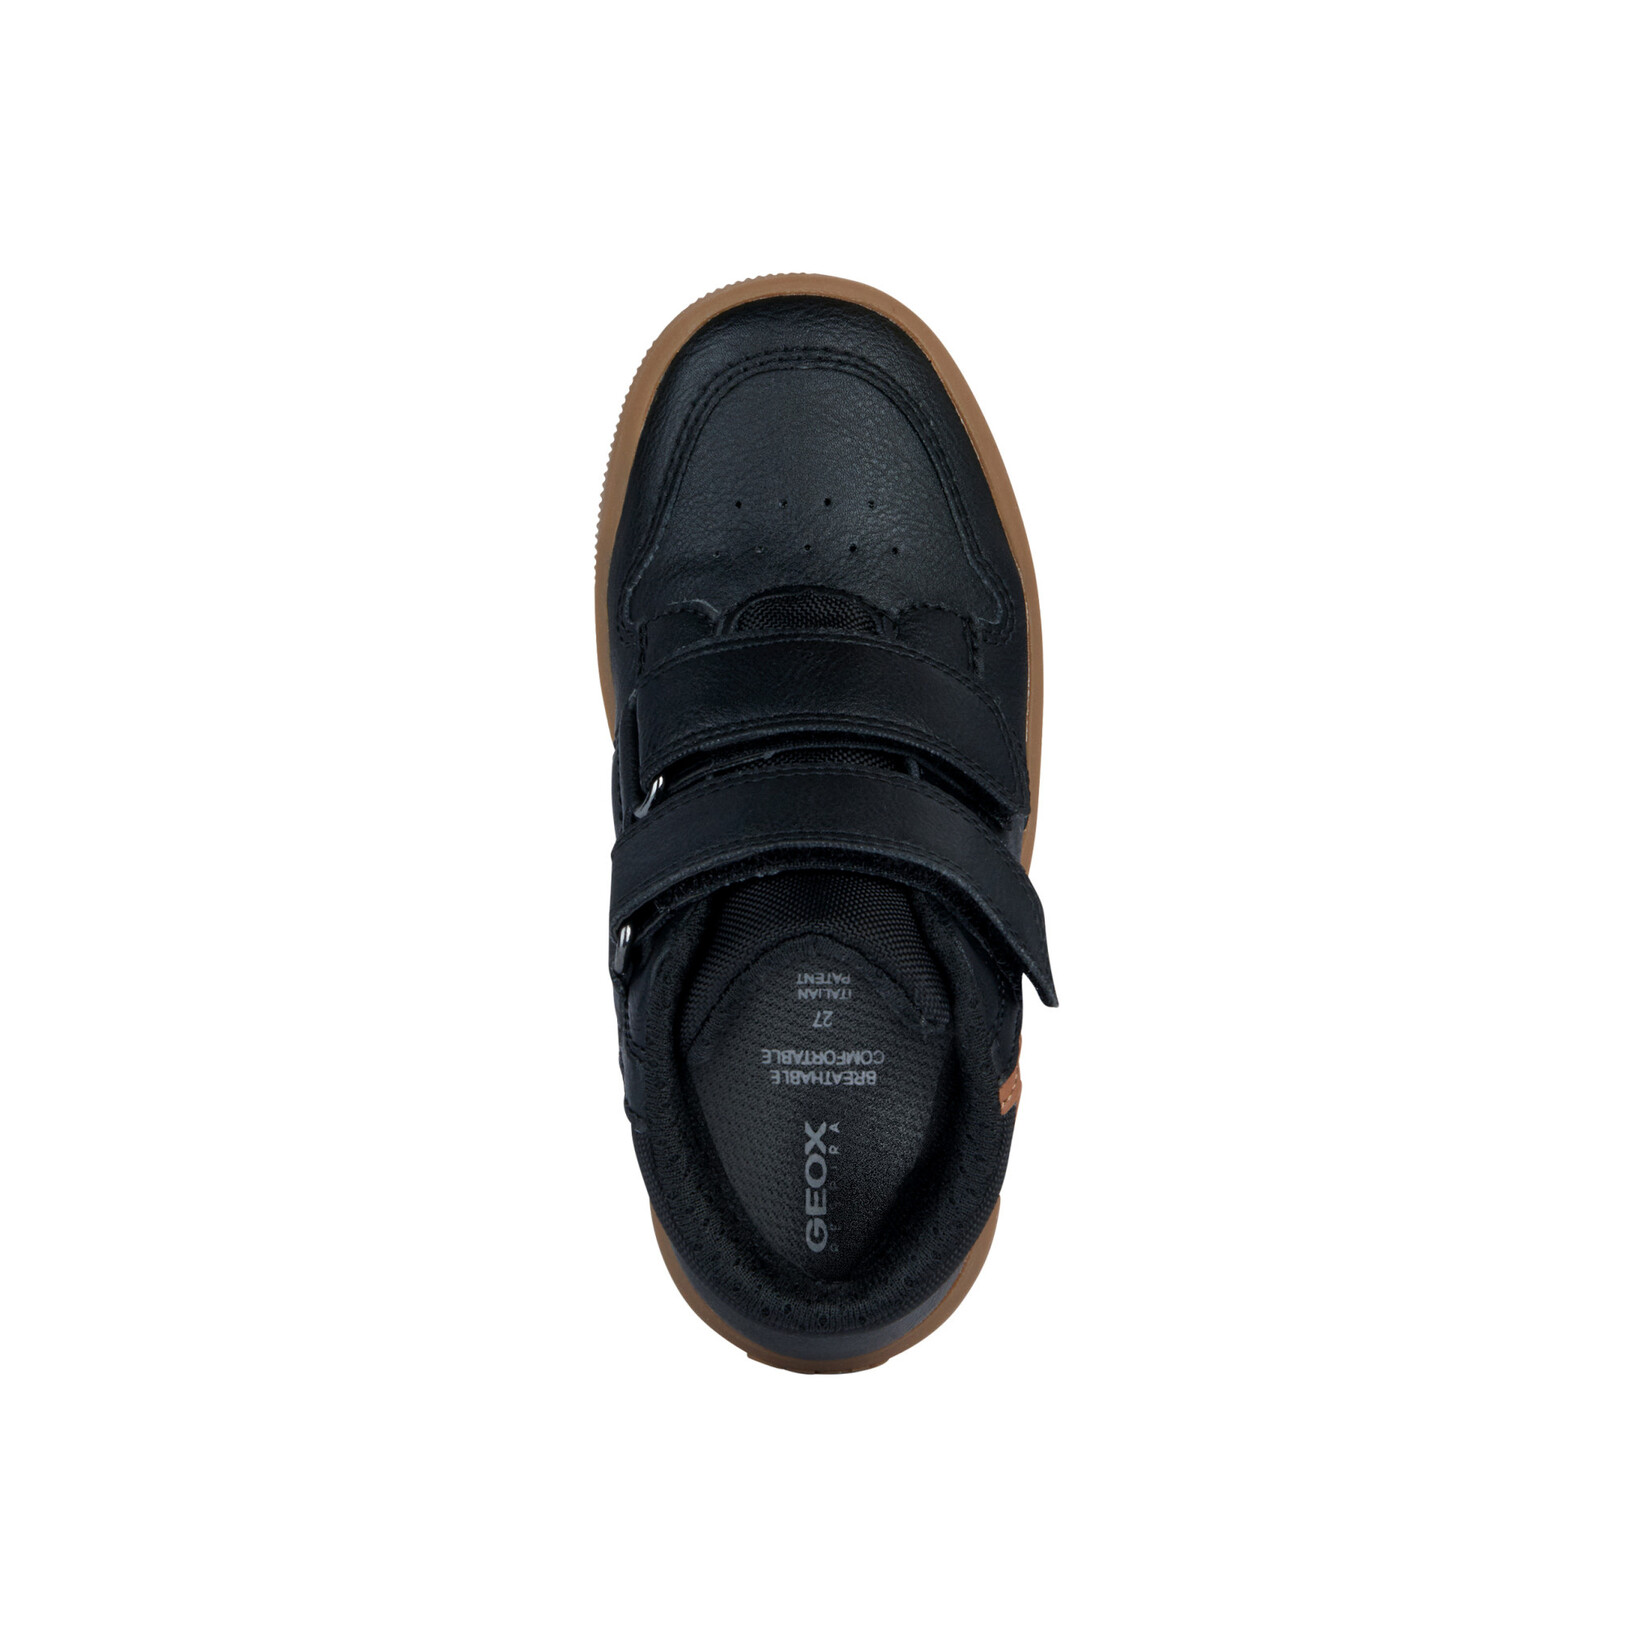 Geox GEOX - High-top Synthetic Leather Sneakers 'J. ARZACH' - Black/Cognac